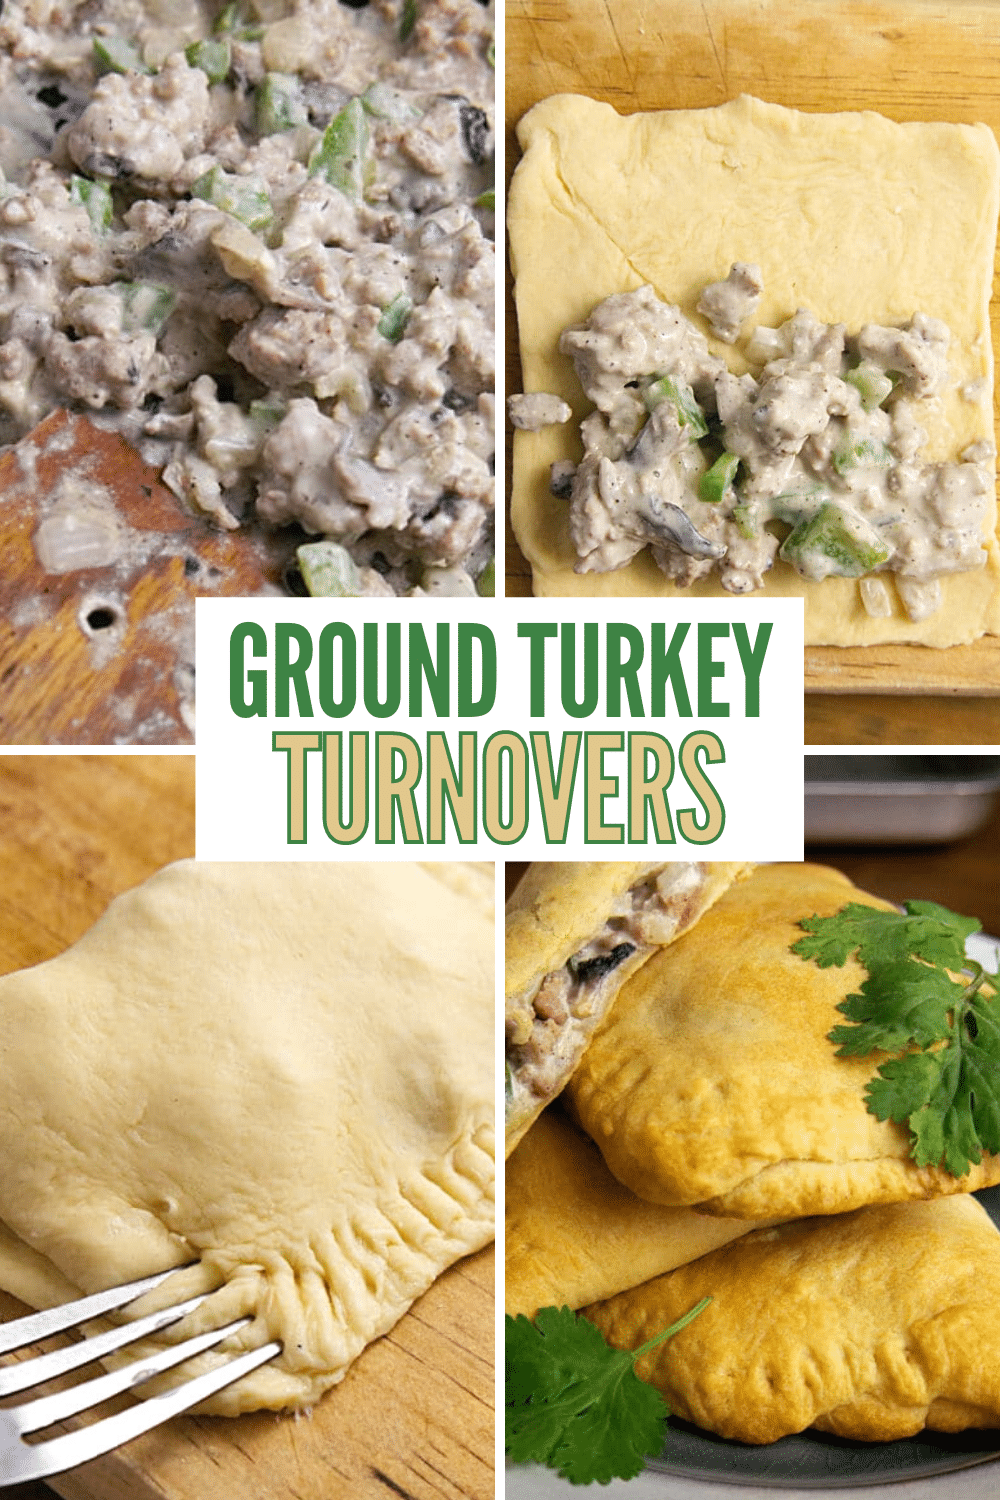 This is one of my favorite dinners when our schedule is crazy. These ground turkey turnovers are easy to eat on the go and kids love them! #easydinner #groundturkey #turnovers via @wondermomwannab